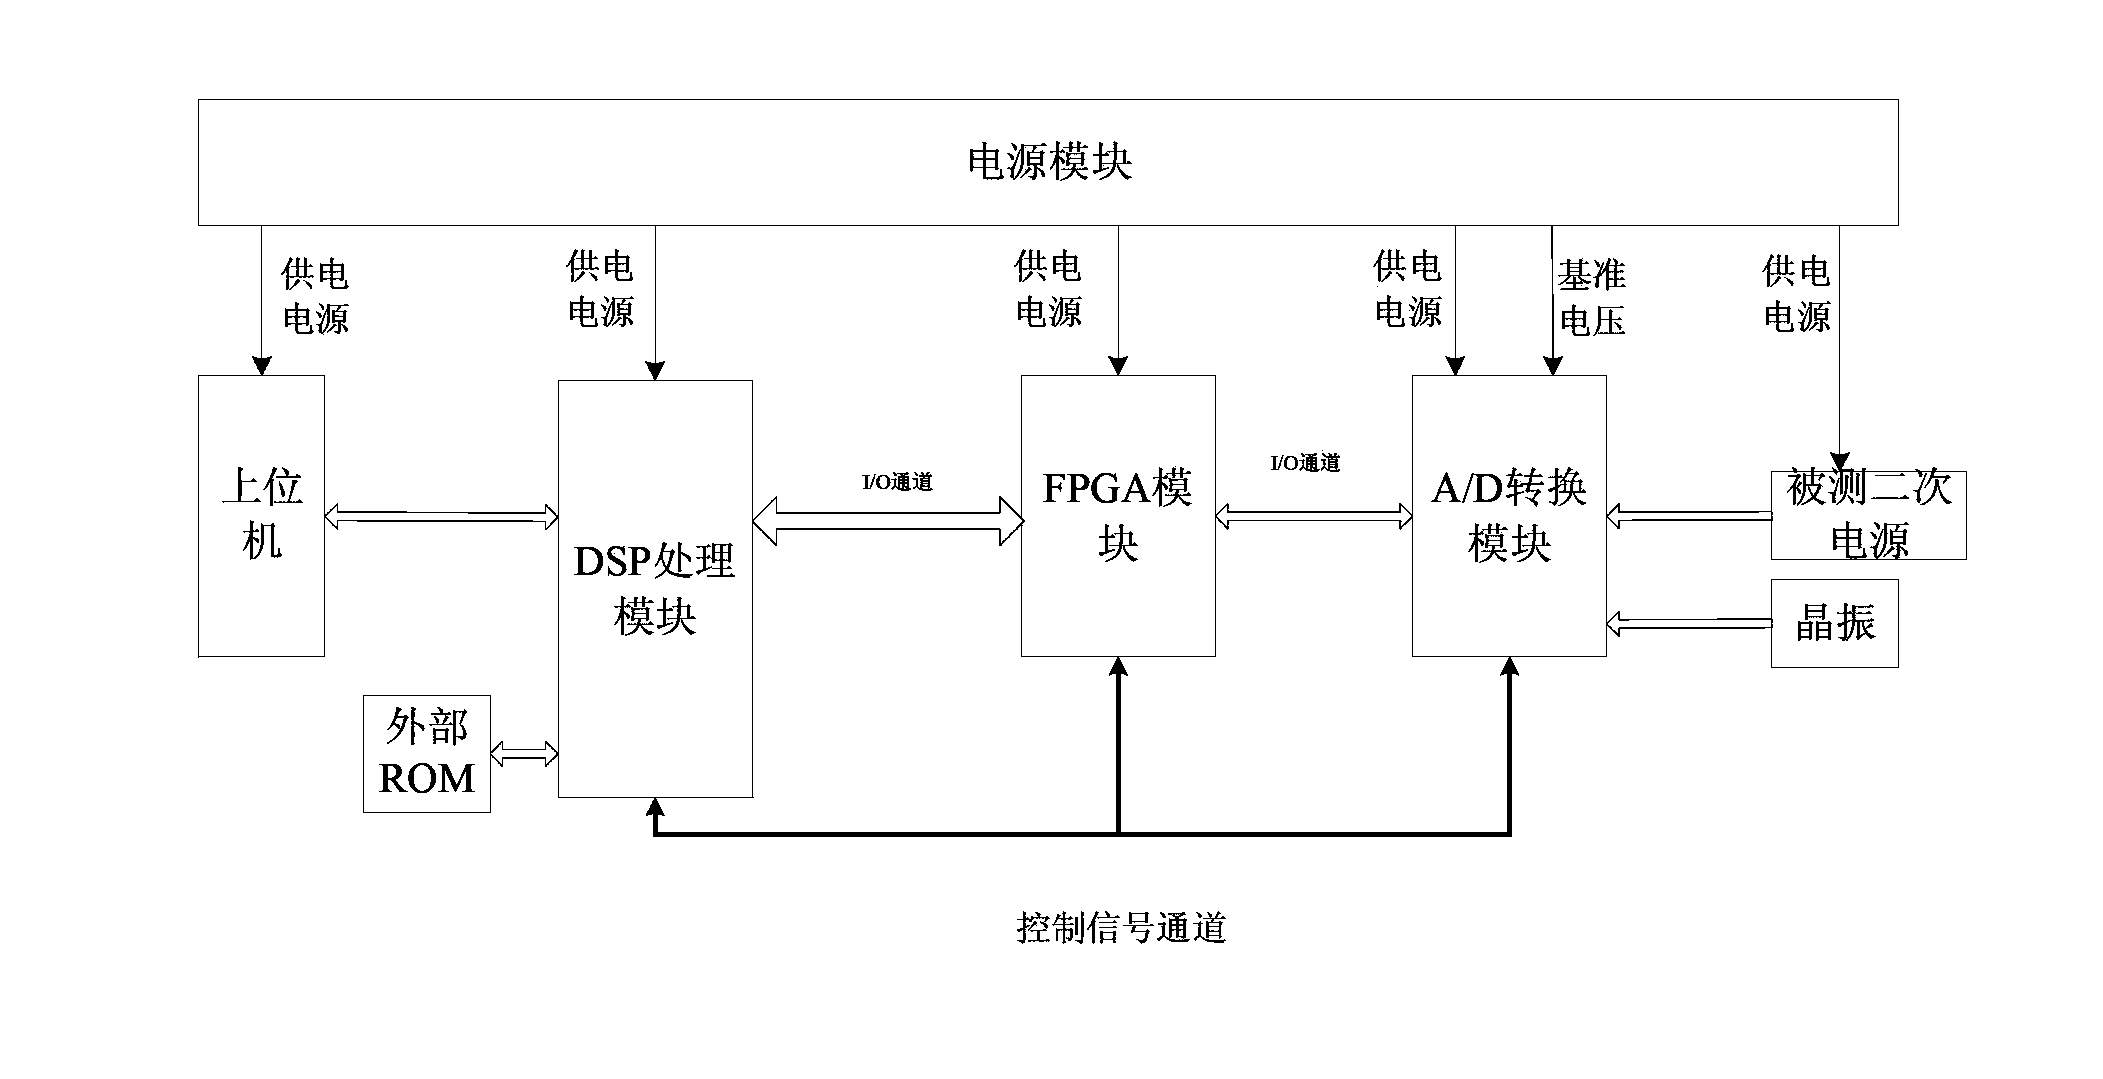 Secondary electric power supply single event effect test method